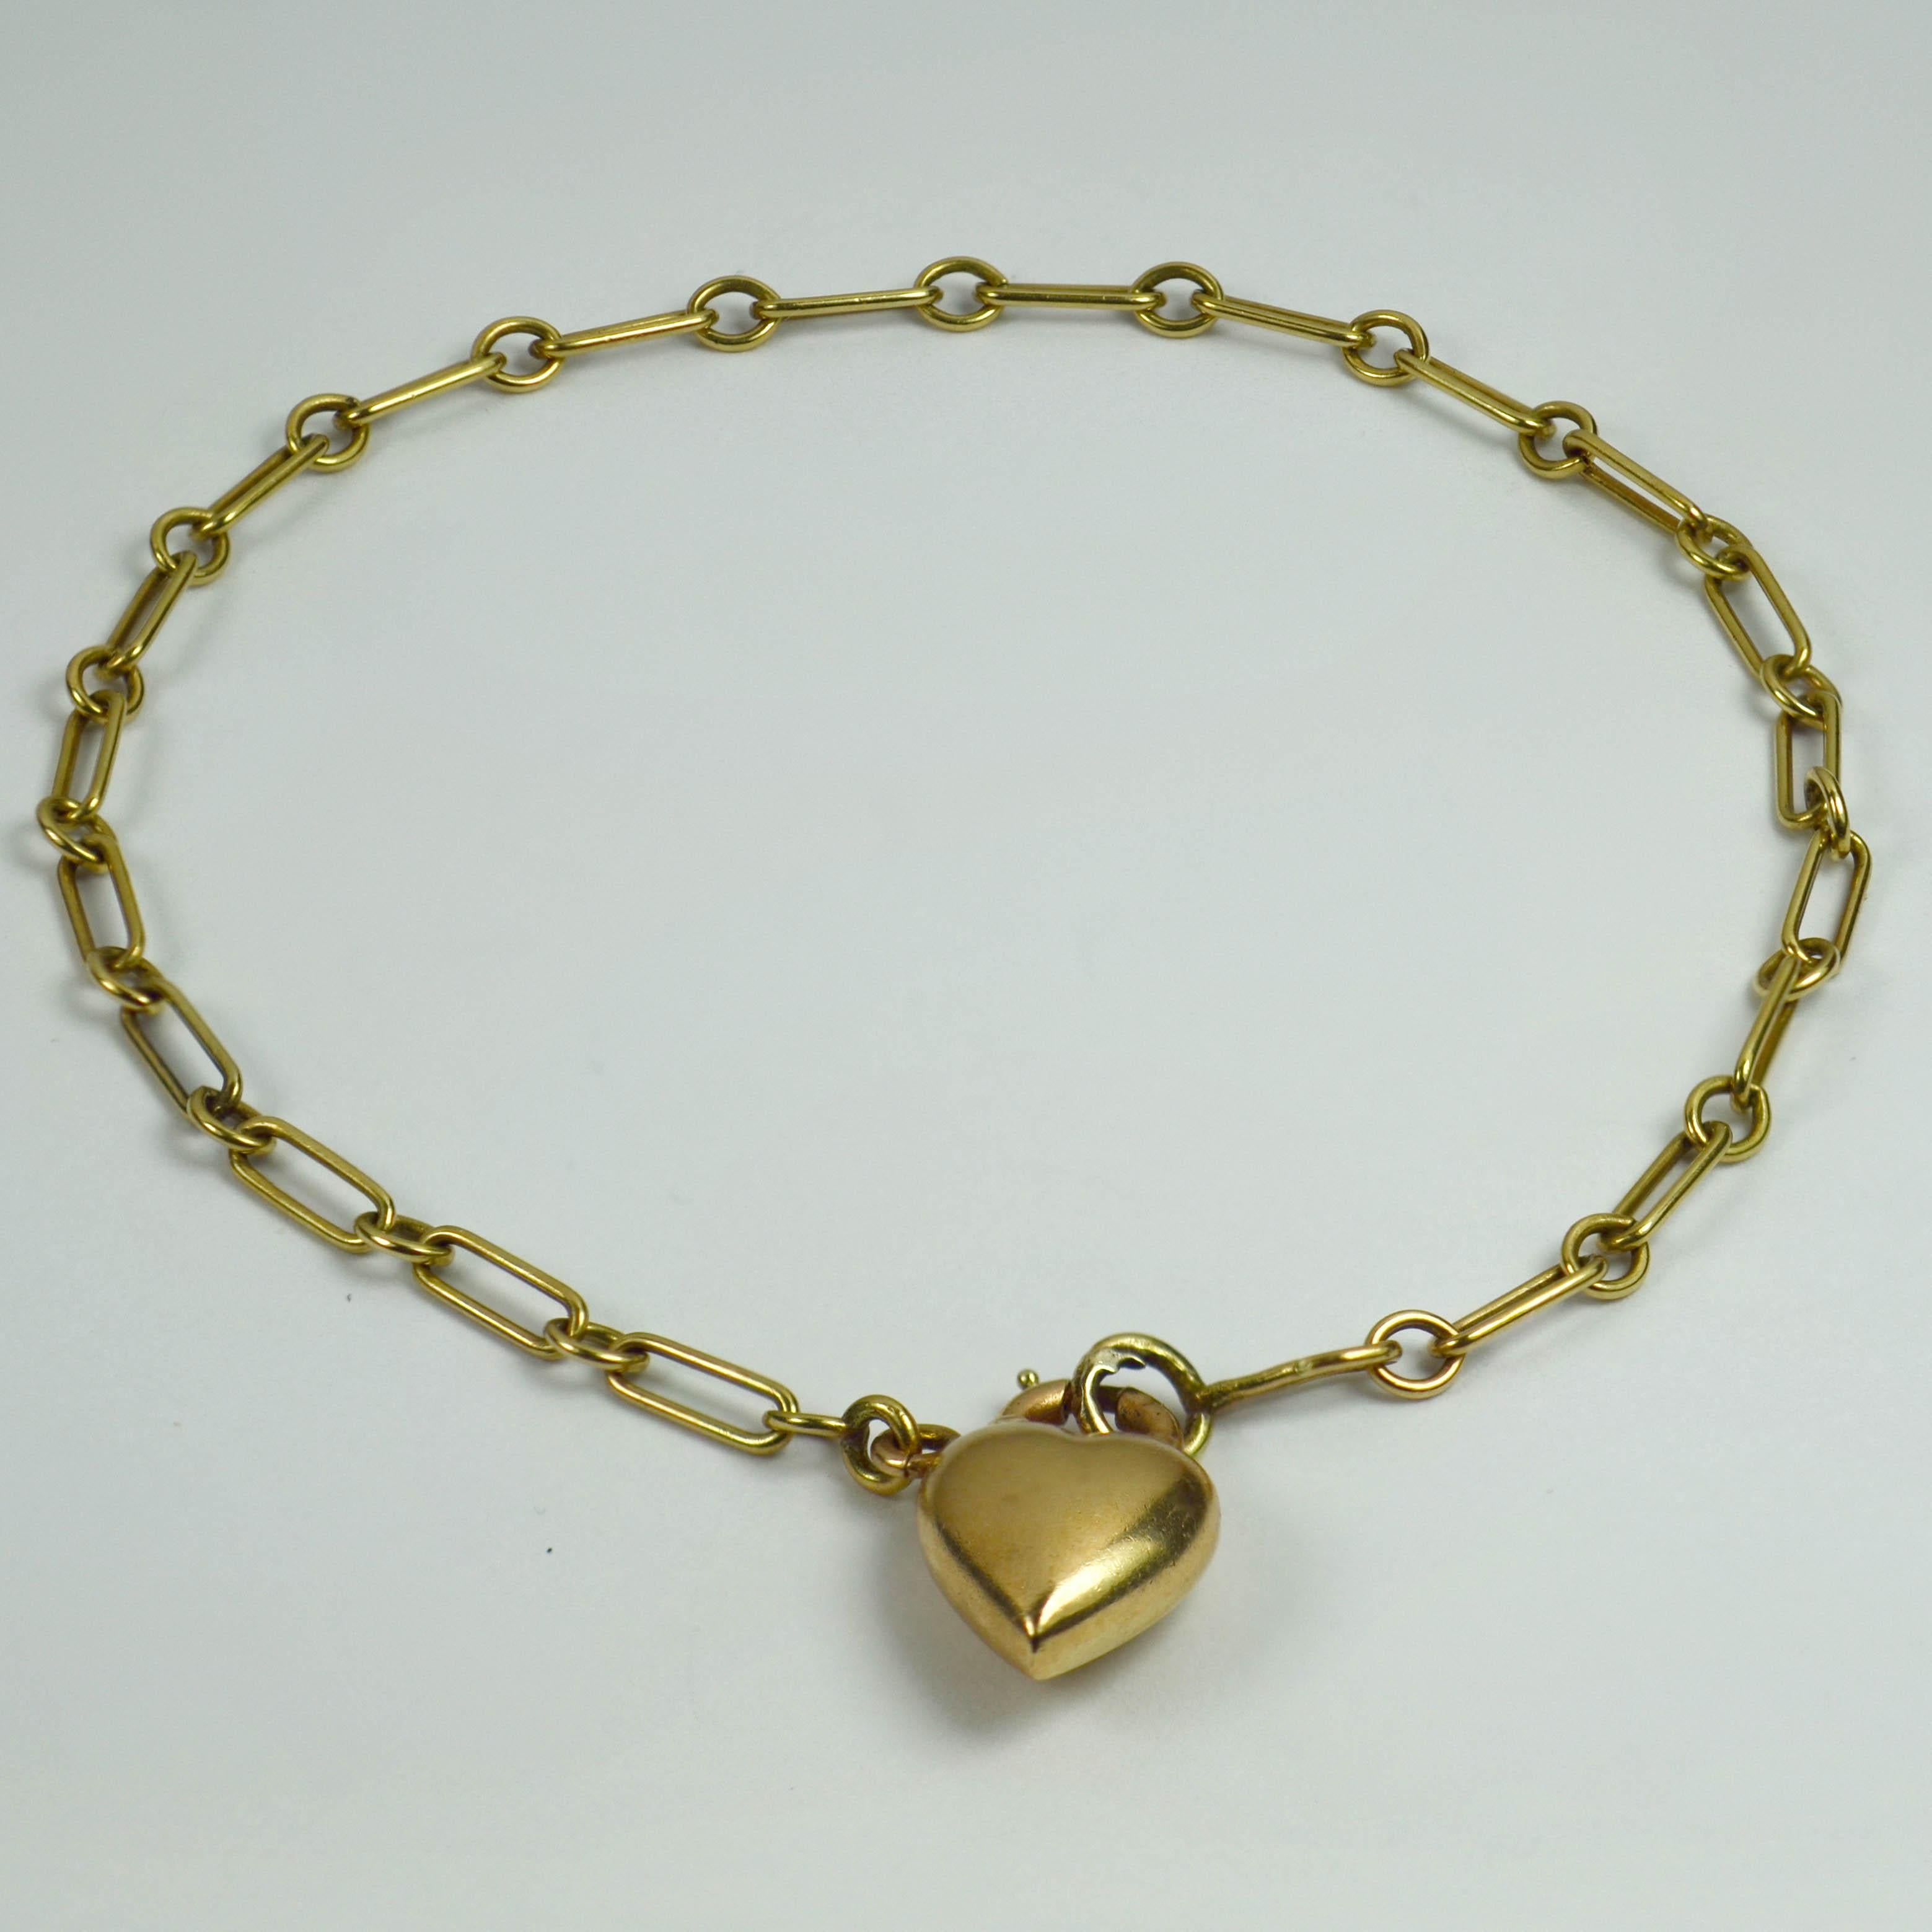 A 14 karat yellow gold belcher chain link bracelet with an 18 karat yellow gold puffy heart padlock charm as a clasp. Marked 14K and 18K. Bracelet measures 7 inches in length.

Dimensions:
Bracelet: 19 x 0.3 cm
Heart Padlock: 1.5 x 0.9 x 0.5